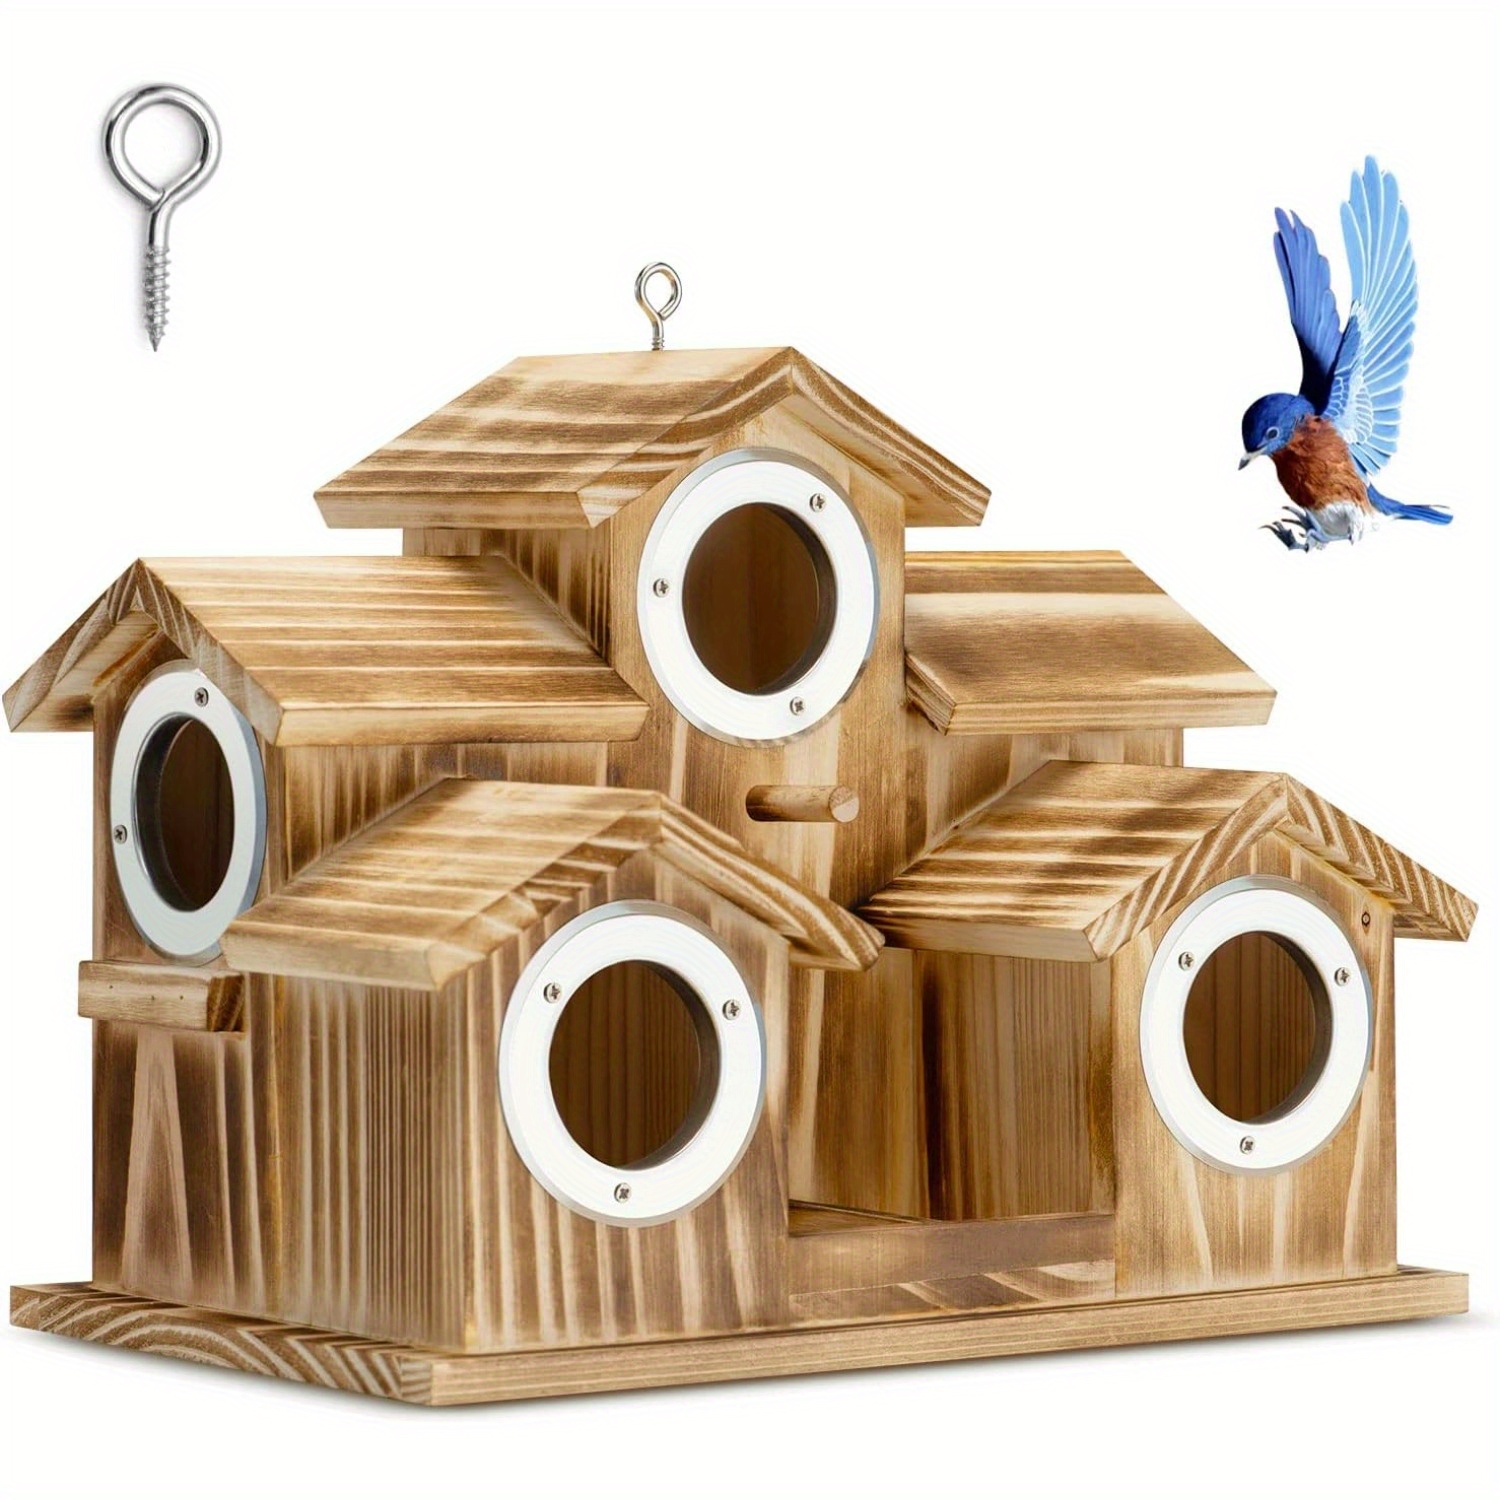 

Bird Houses For Outside 5 Hole Wooden Natural Birdhouse With Metal Guard Finch Handmade Hanging Birdhouse For Garden Backyard Courtyard (brown)